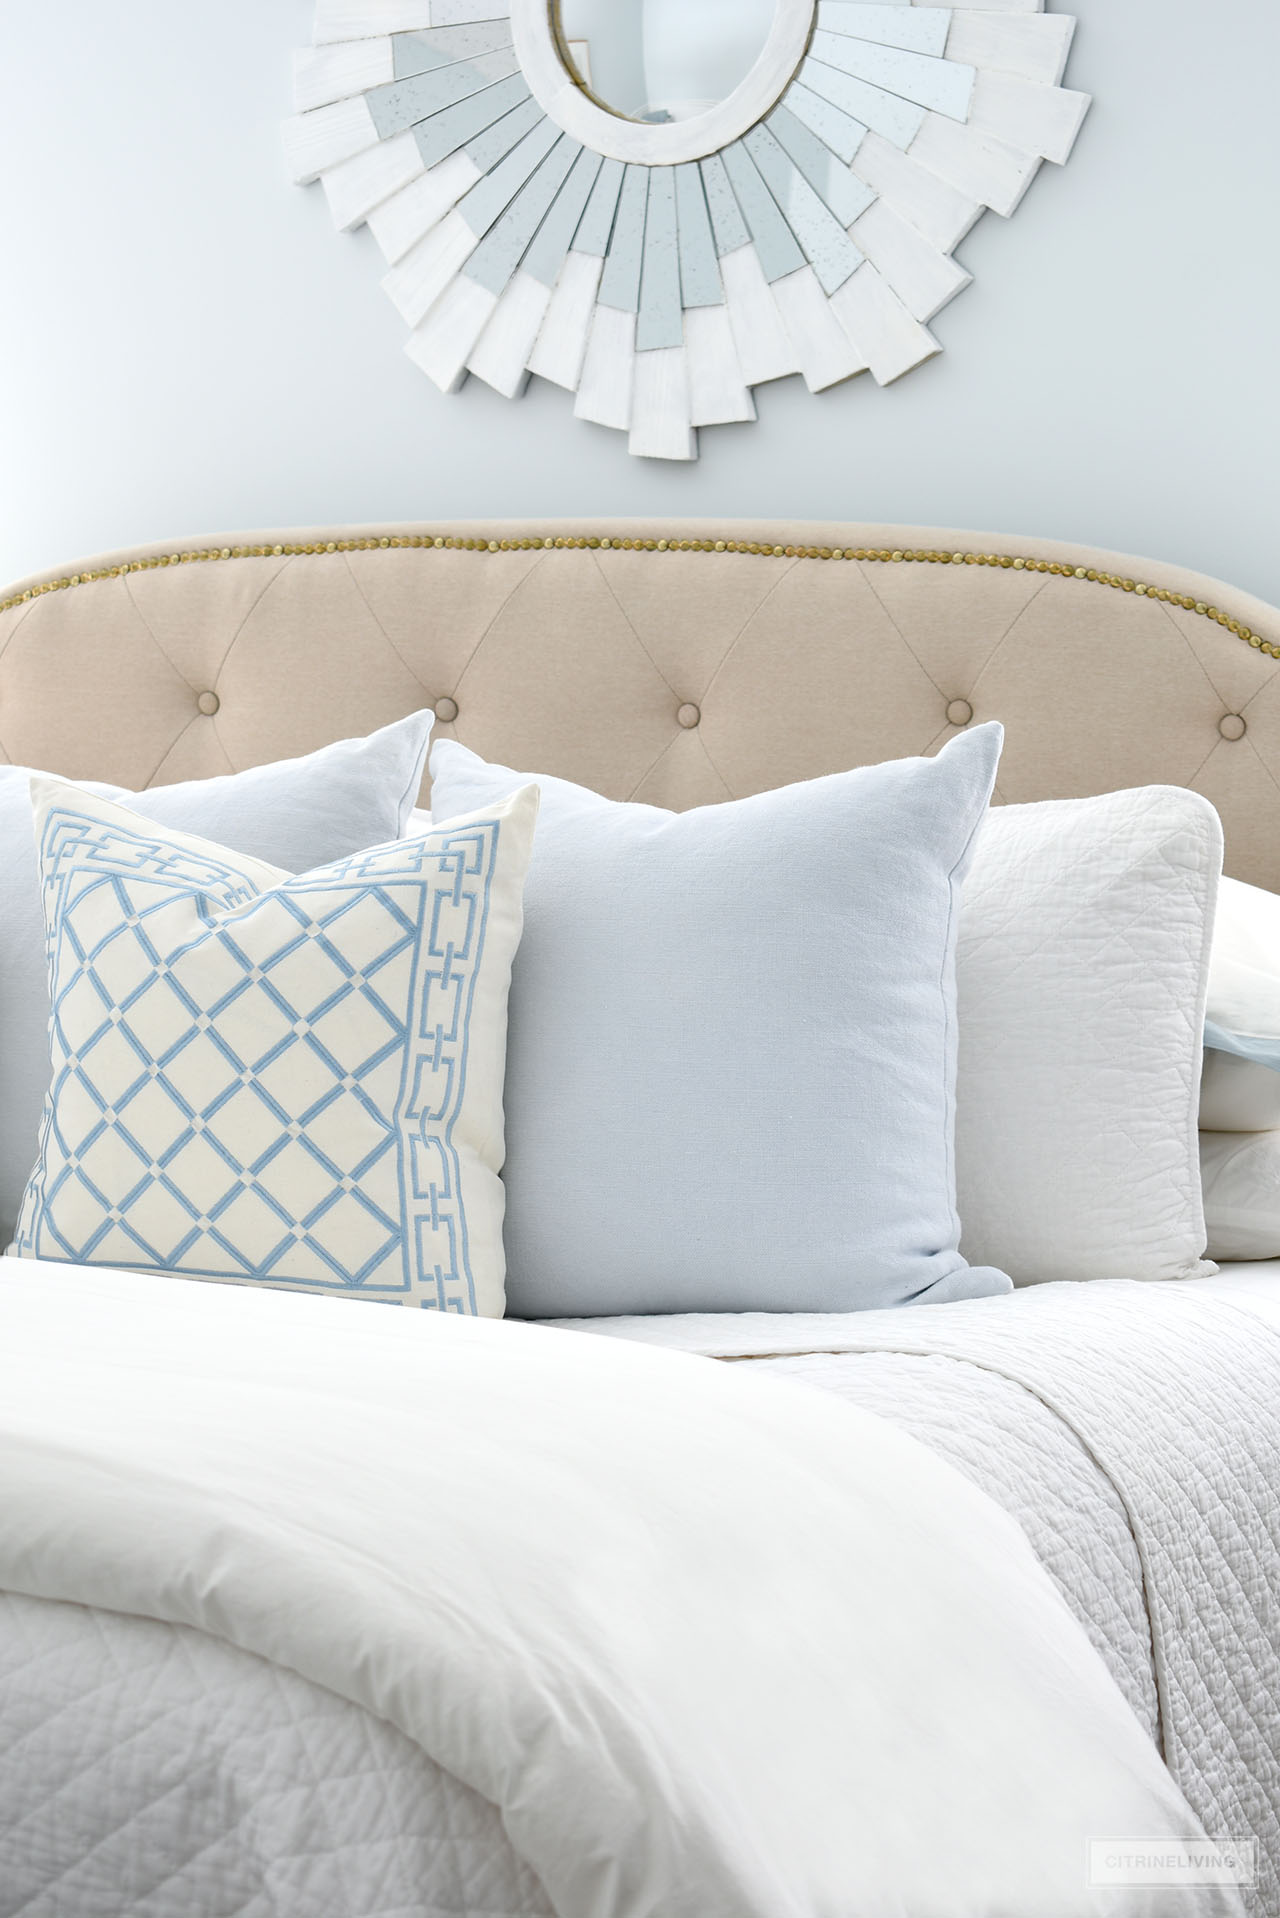 Layers of light blue and white embroidered pillows in a diamond pattern, layered with pretty pale blue linen pillows styled on an upholstered bed.